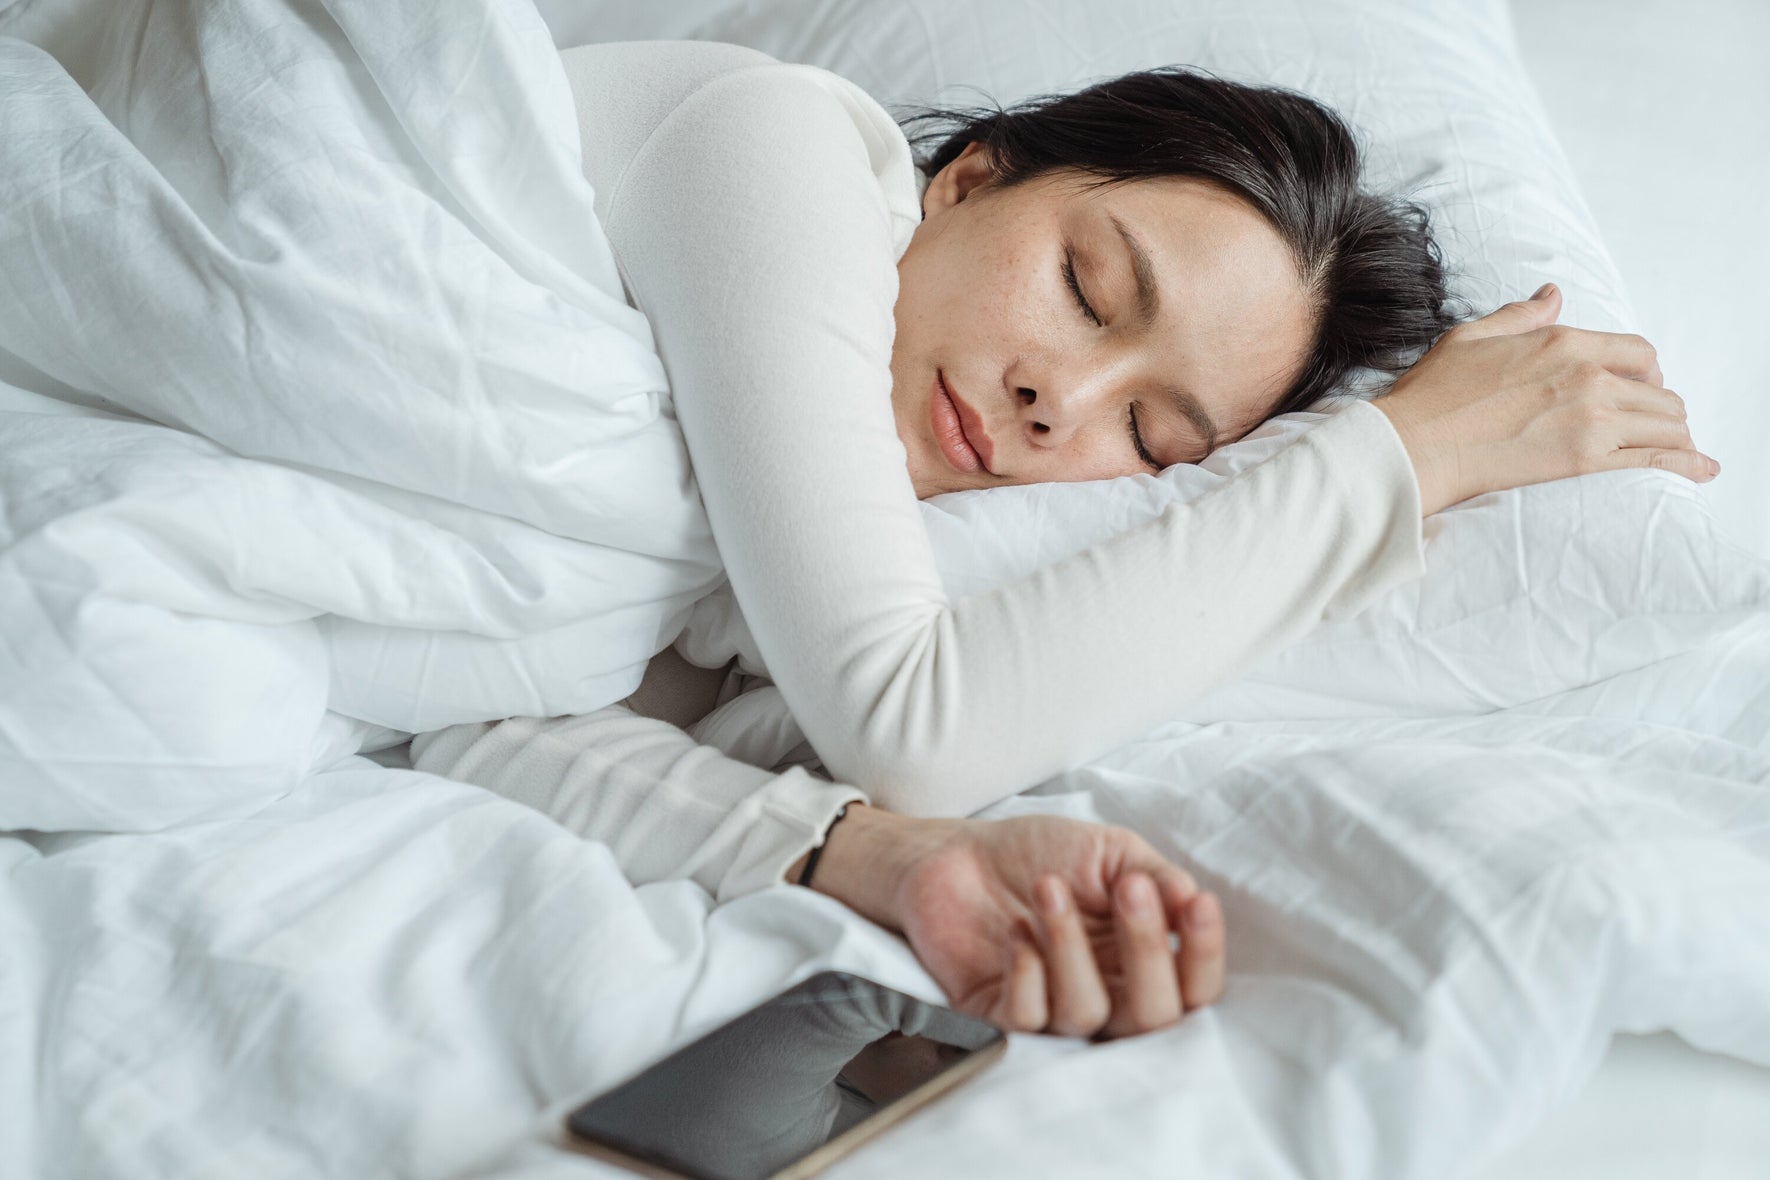 Do You Suffer from Sleep Anxiety?